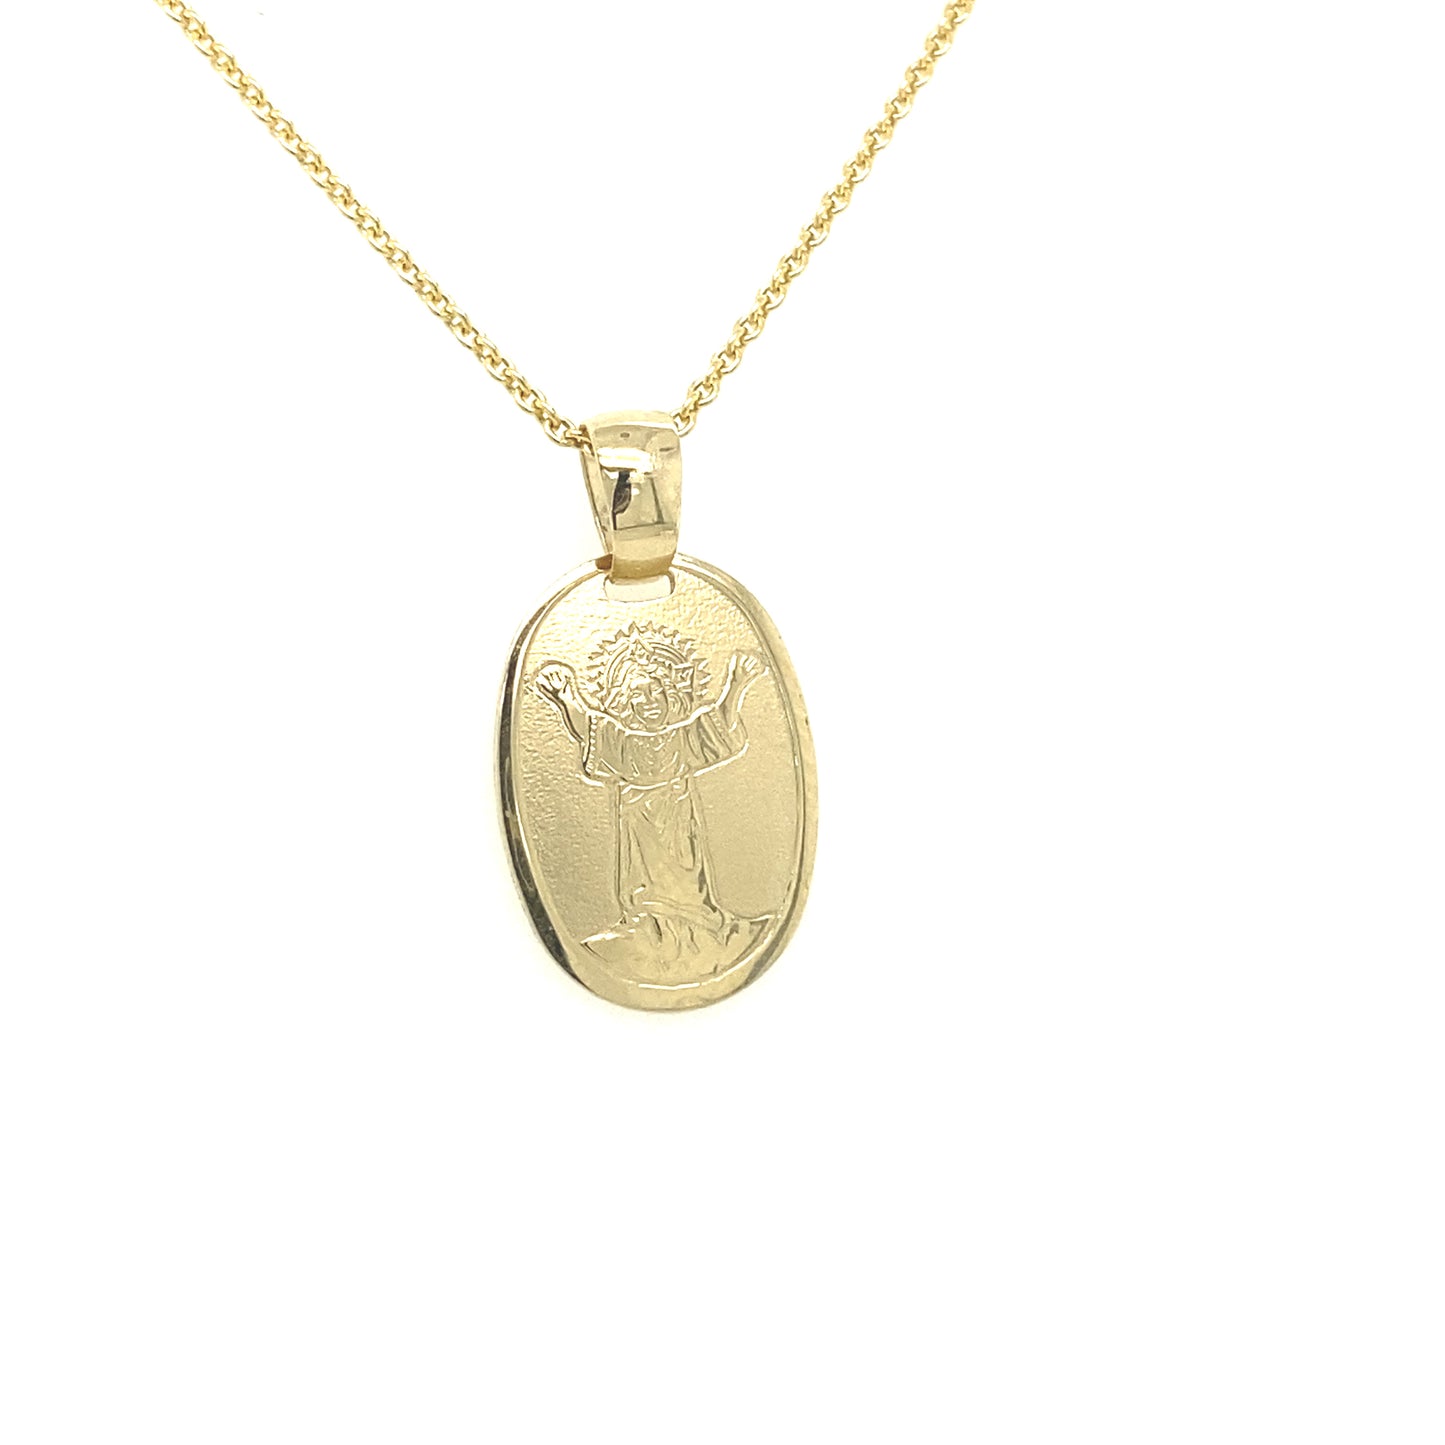 14K Gold Divino Niño Pendant | Luby Gold Collection | Luby 